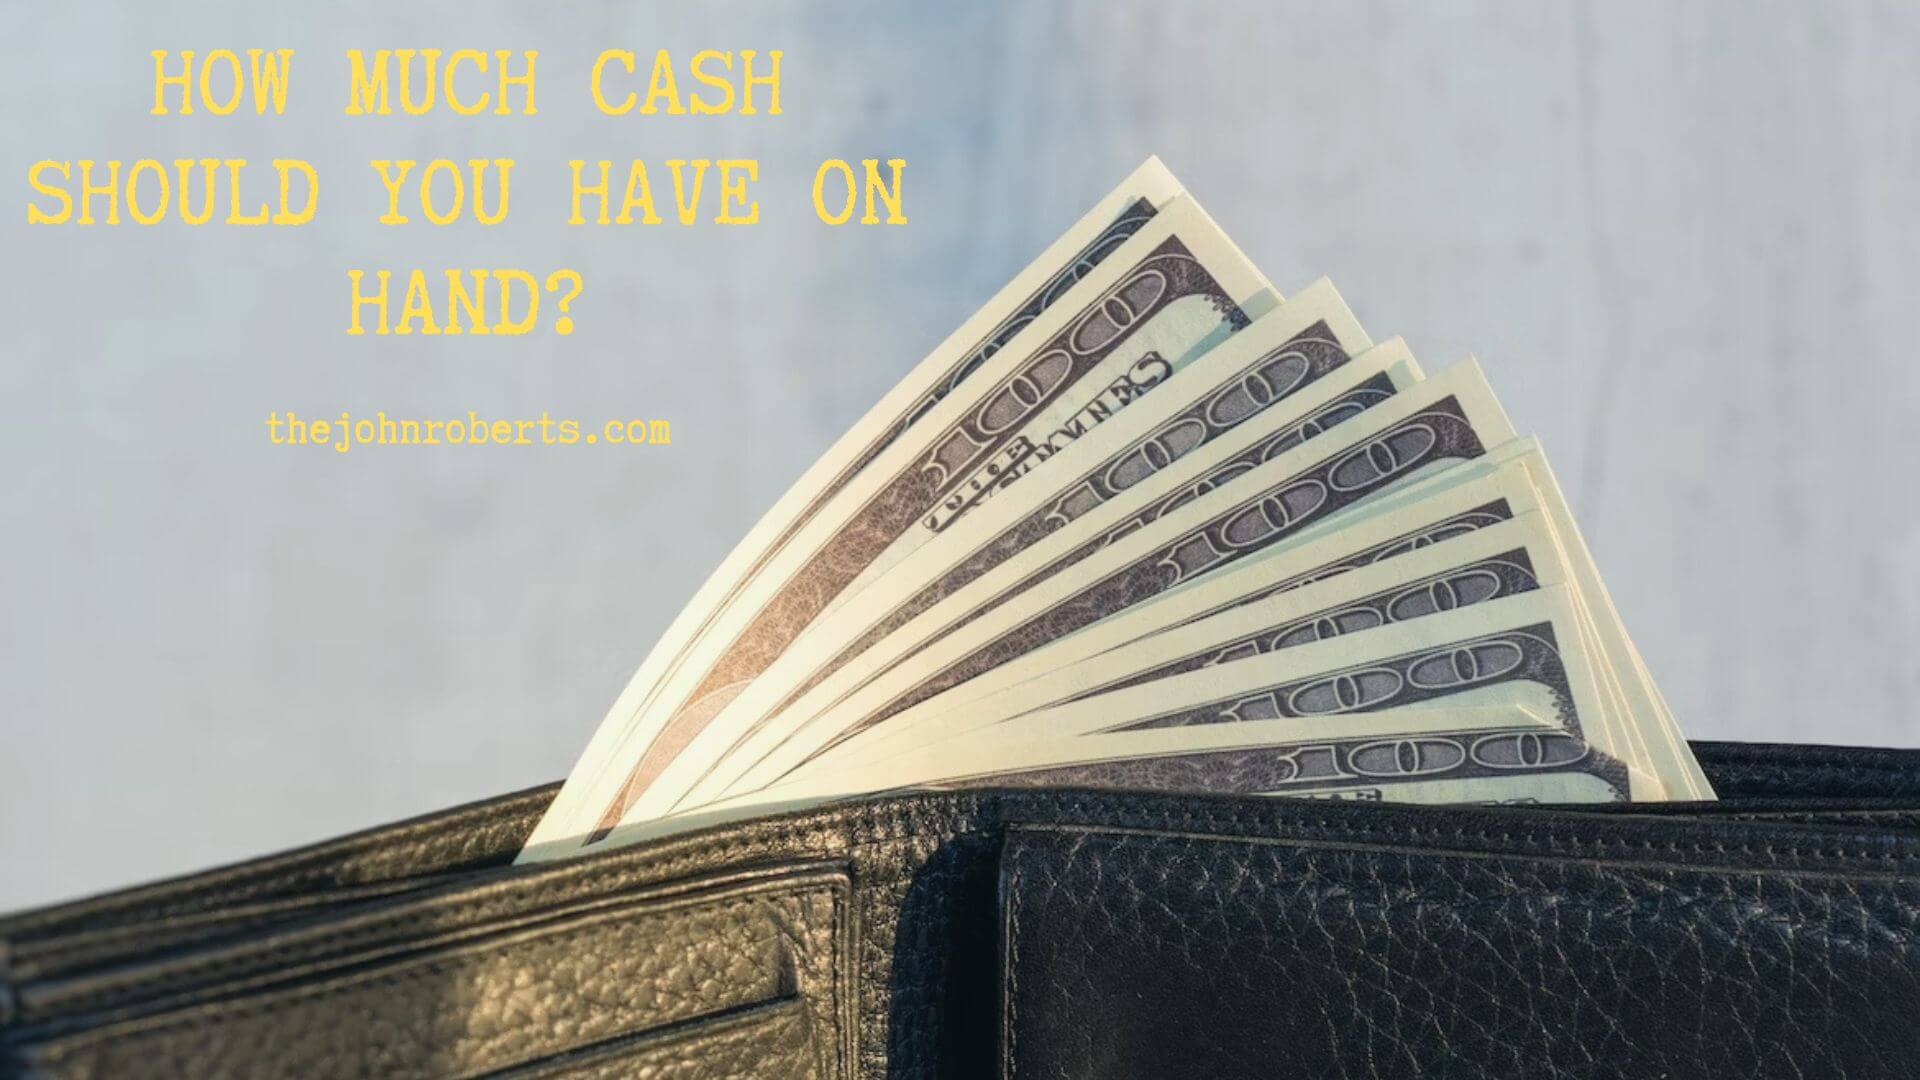 How Much Cash Should You Have On Hand?